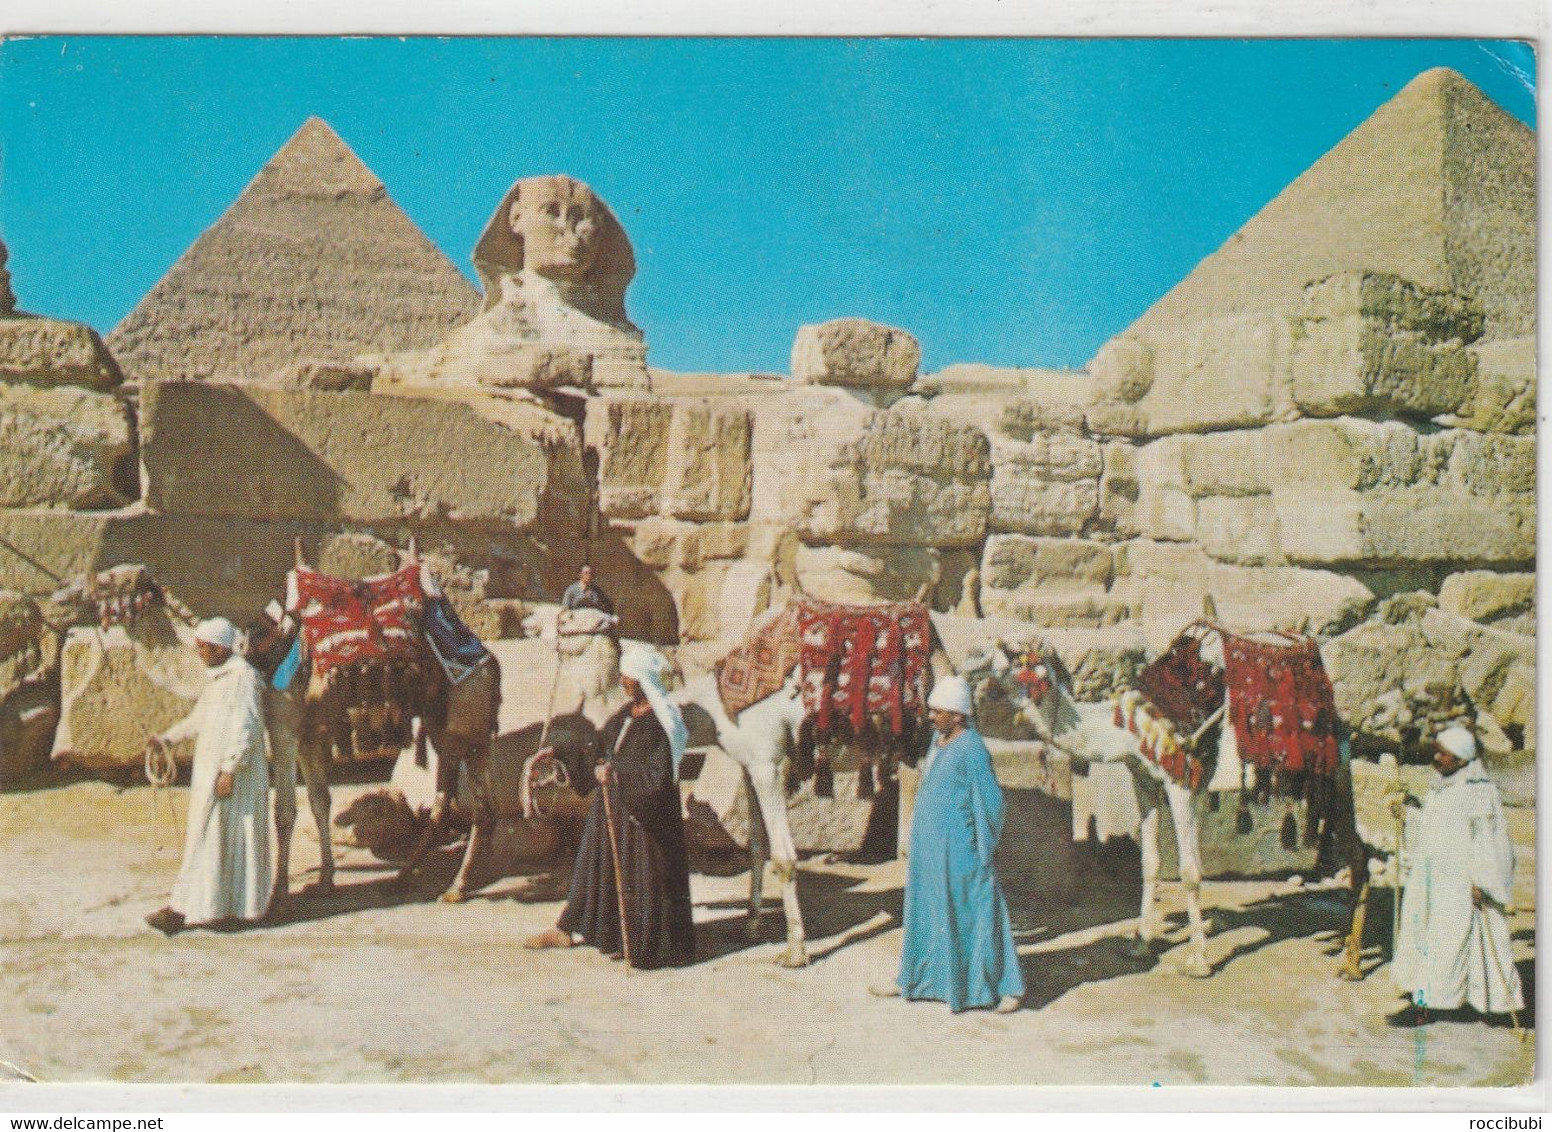 Giza, The Great Sphinx And Keops Pyramid - Guiza